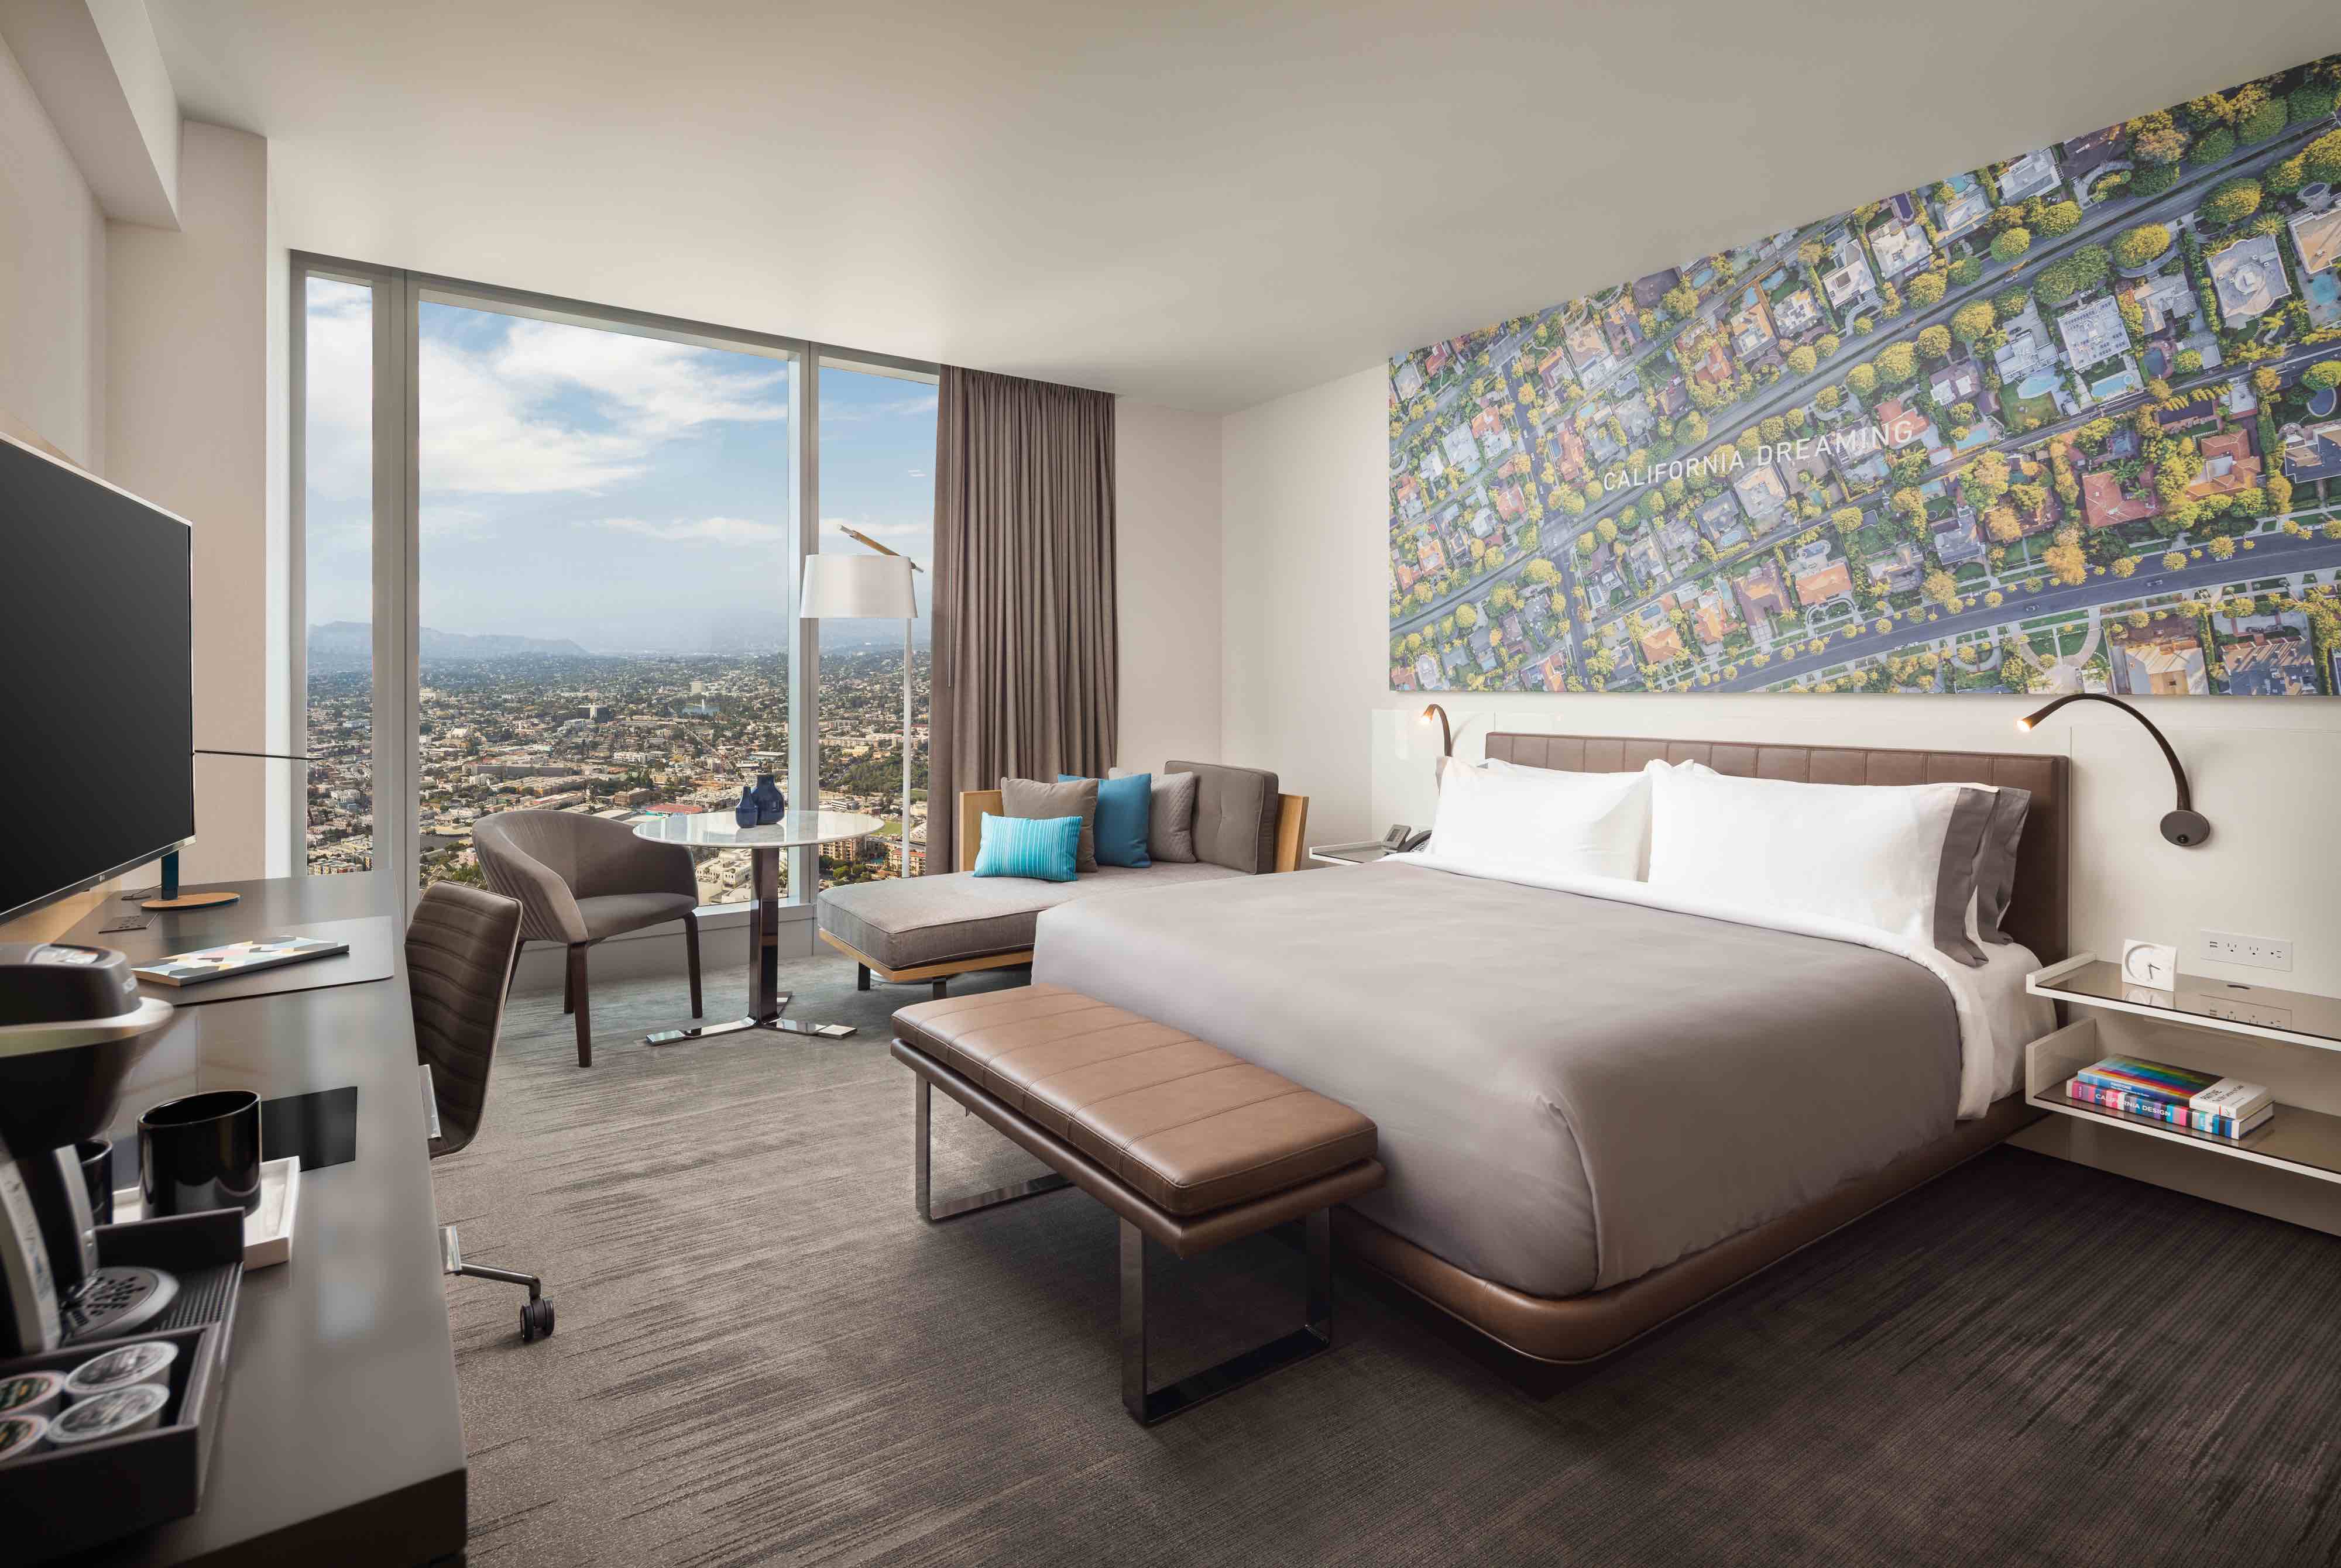 Los Angeles Hotels Deals Now